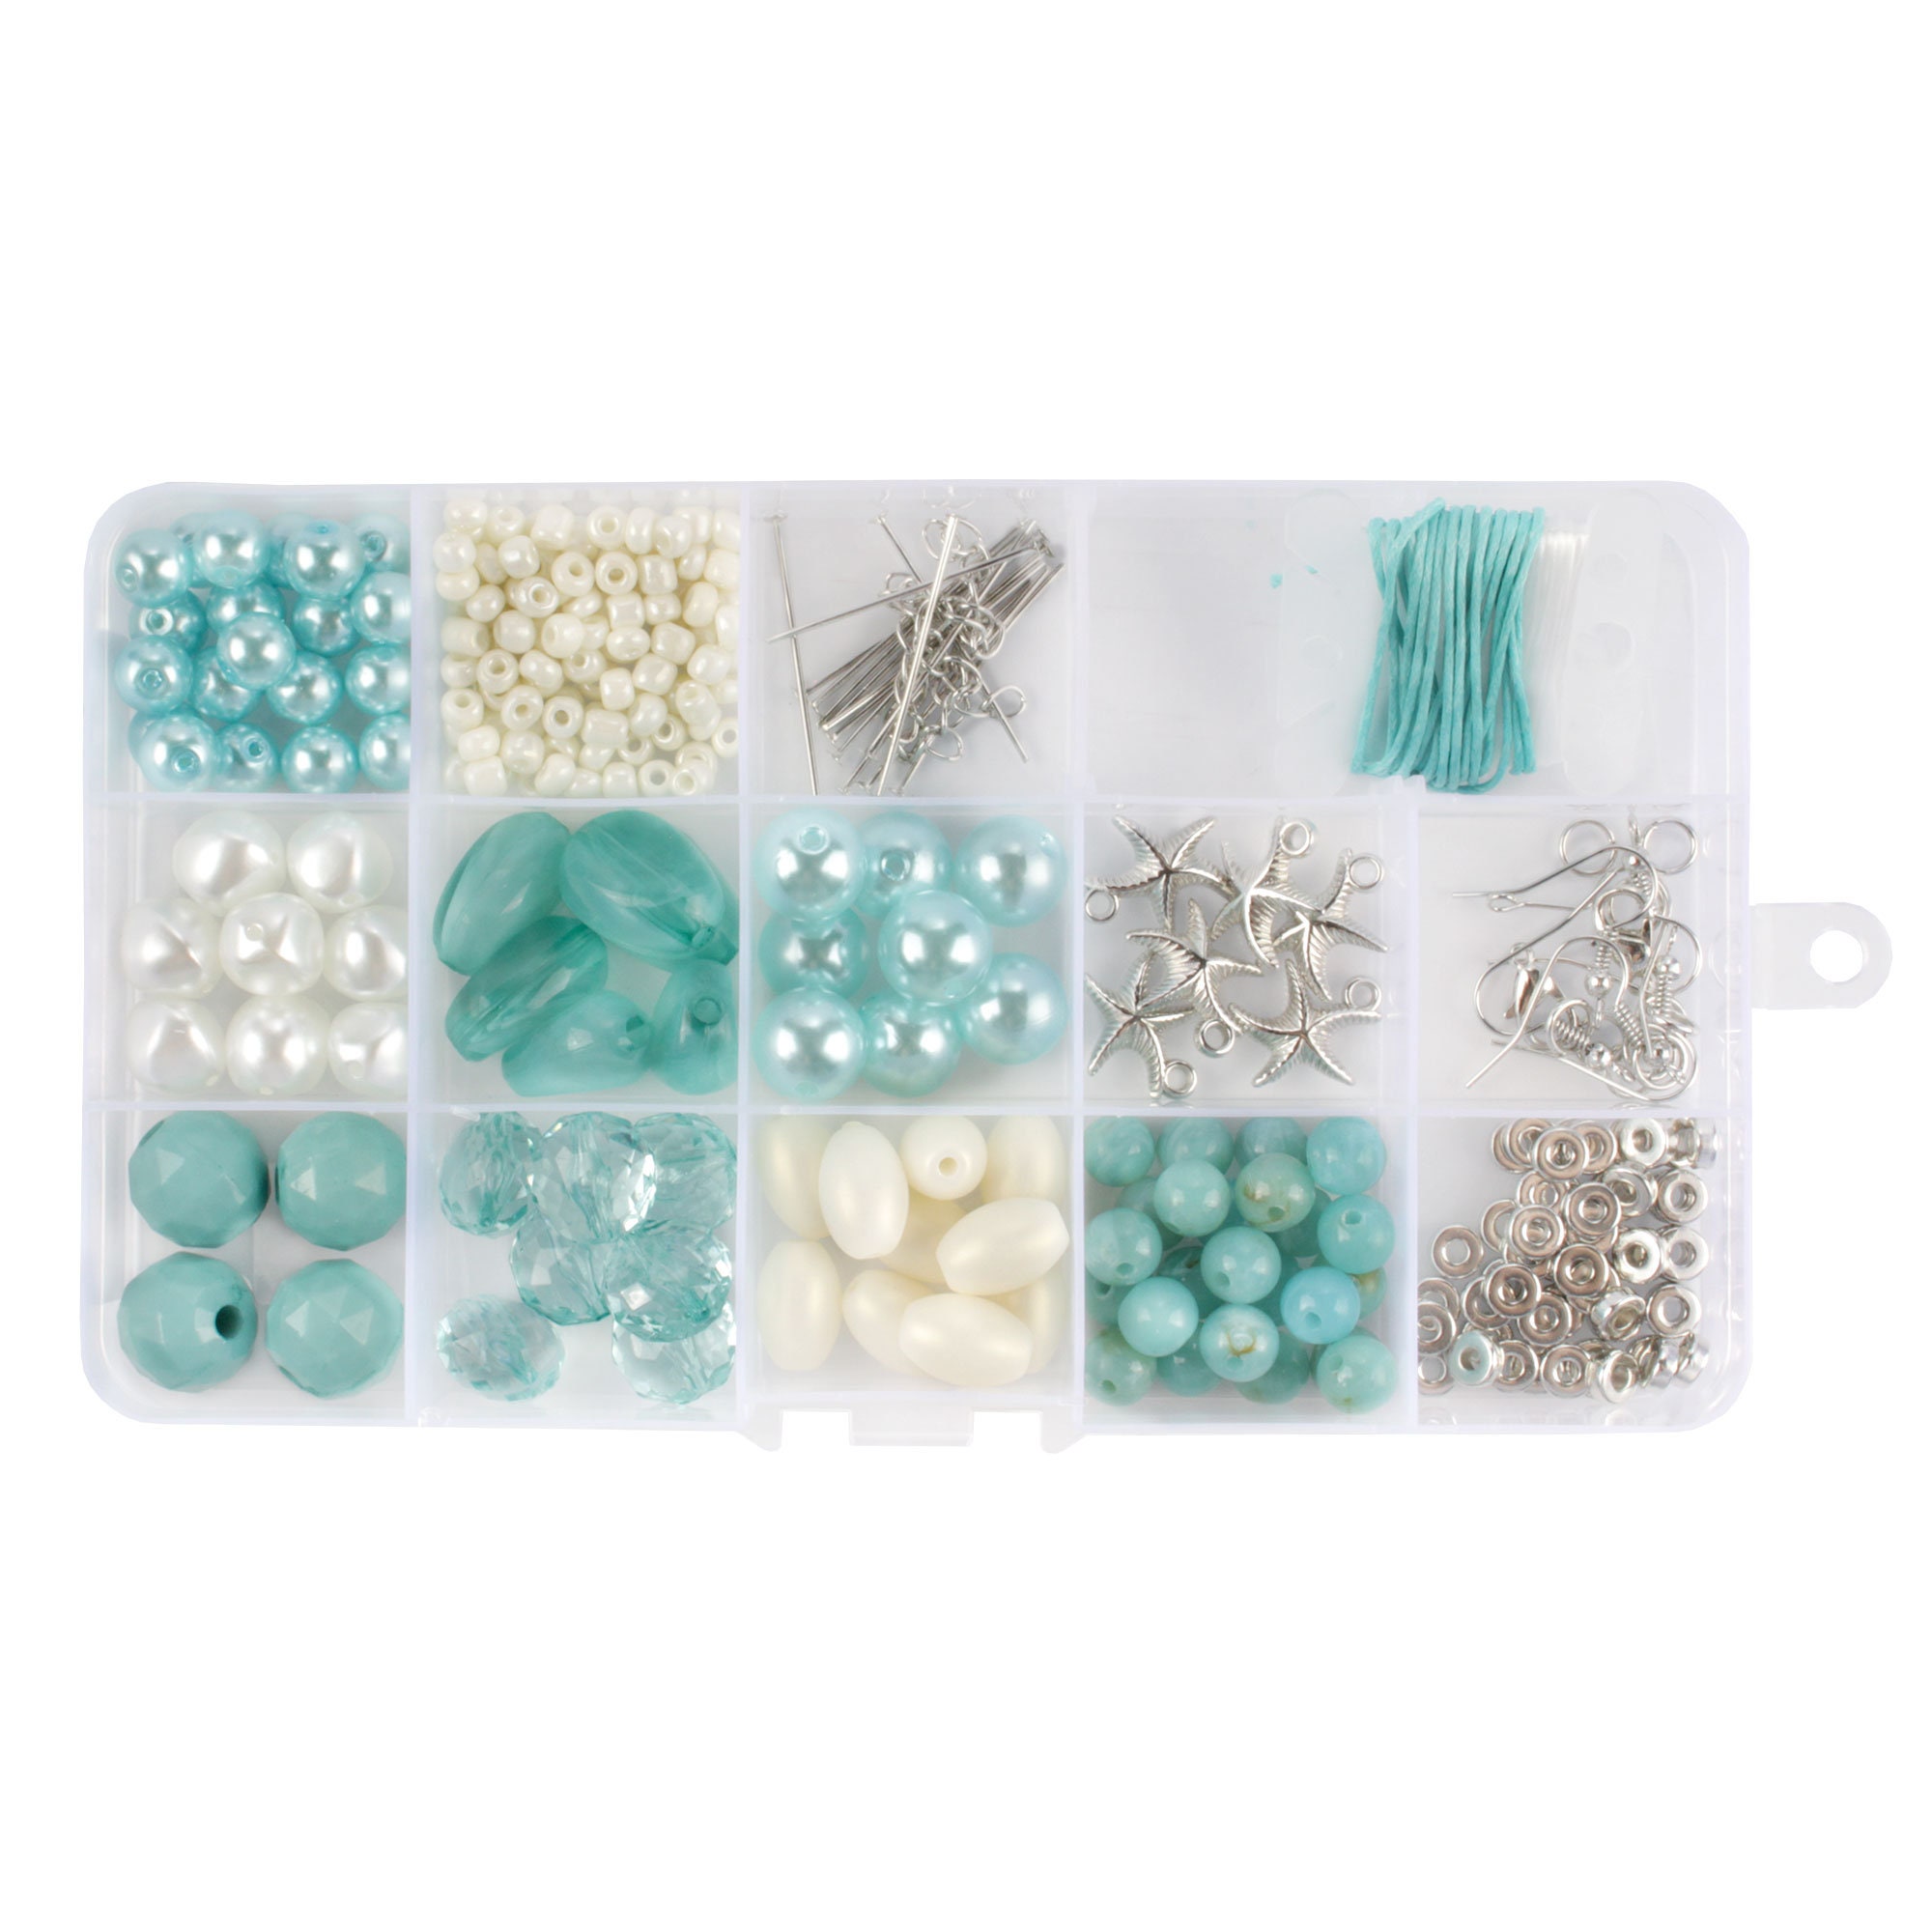 Bead Kits for Jewelry Making DIY Bracelets, Necklaces, and